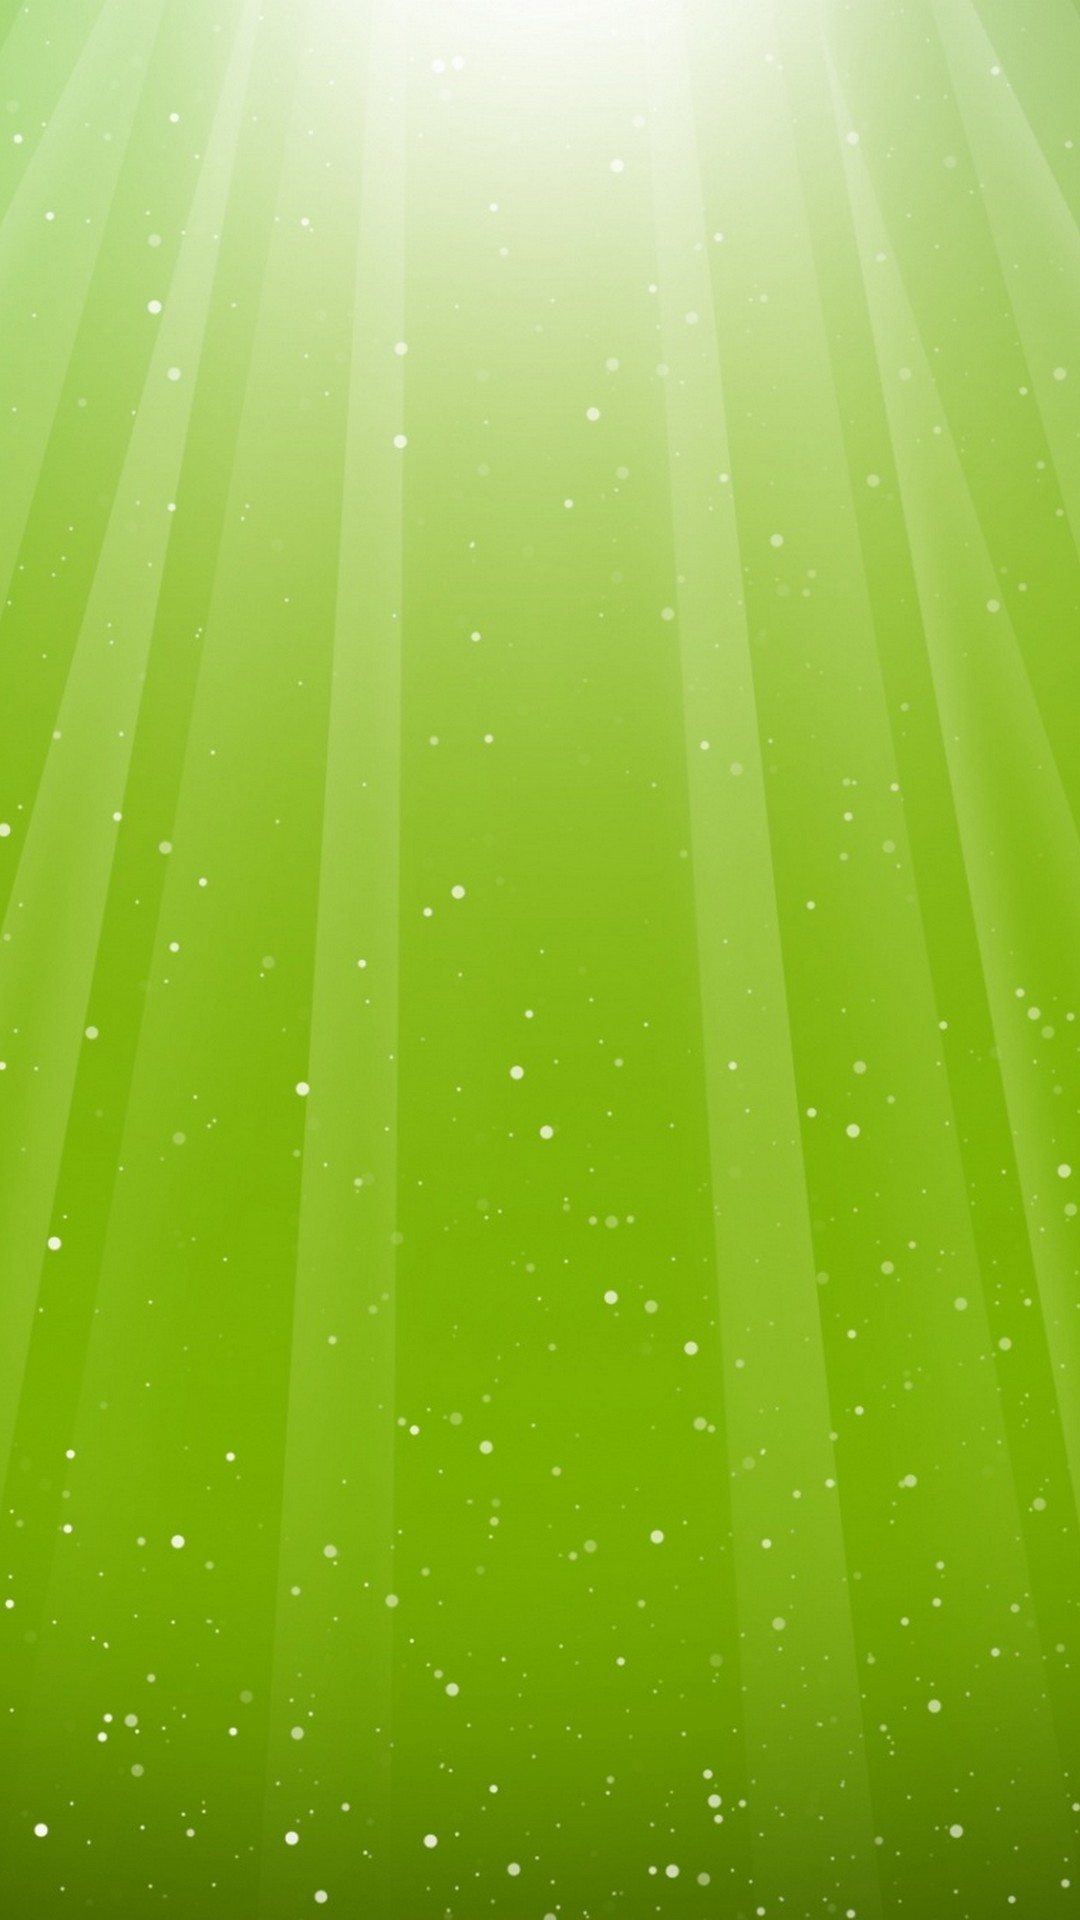 Light Green iPhone Wallpaper with resolution 1080X1920 pixel. You can make this wallpaper for your iPhone 5, 6, 7, 8, X backgrounds, Mobile Screensaver, or iPad Lock Screen